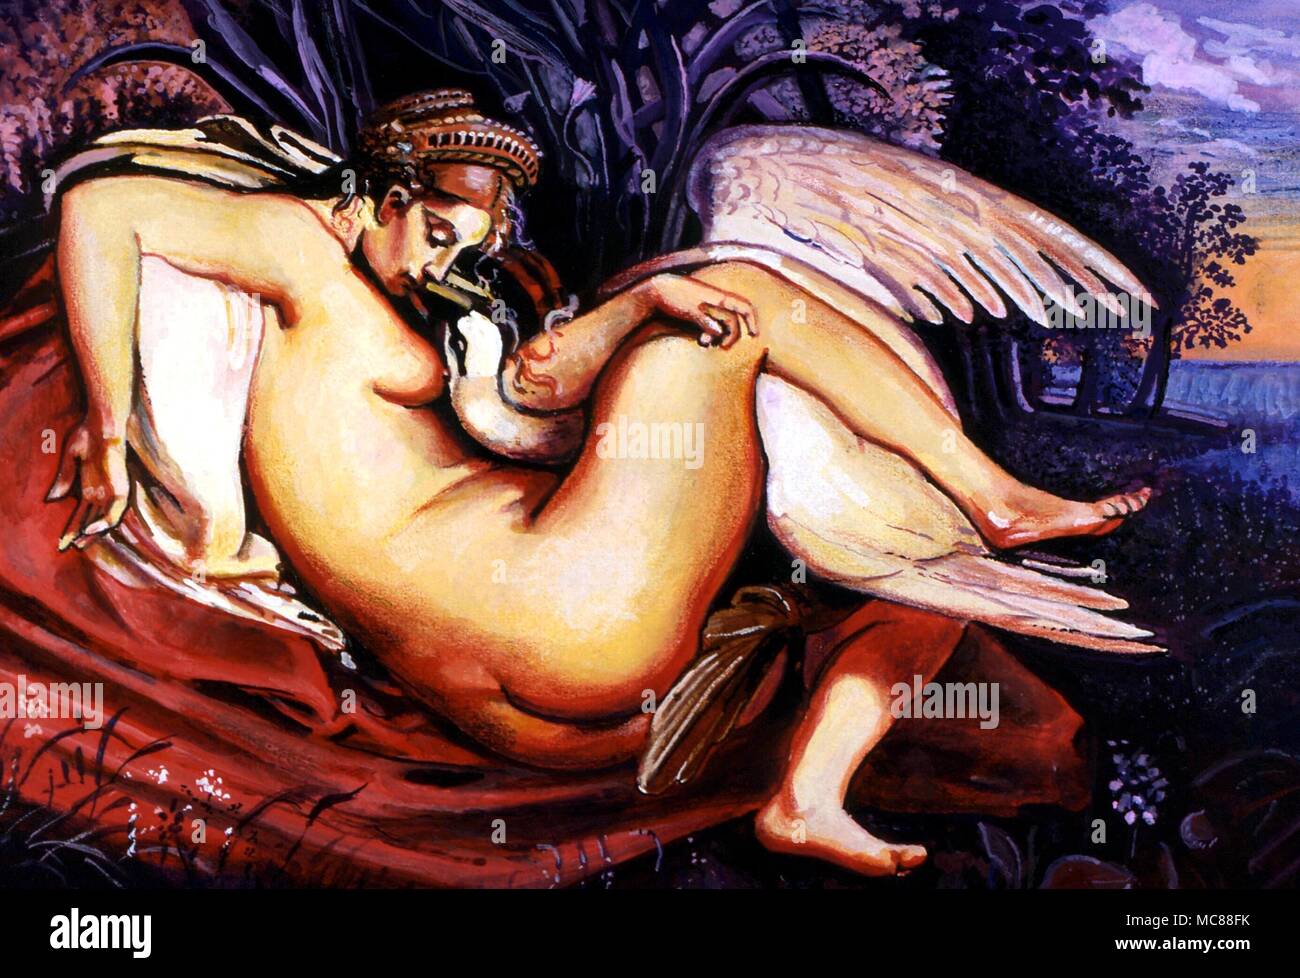 ANIMALS - Swan 'Leda and the Swan' painting depicting the god Jupiter raping Leda in the form of a Swan Stock Photo